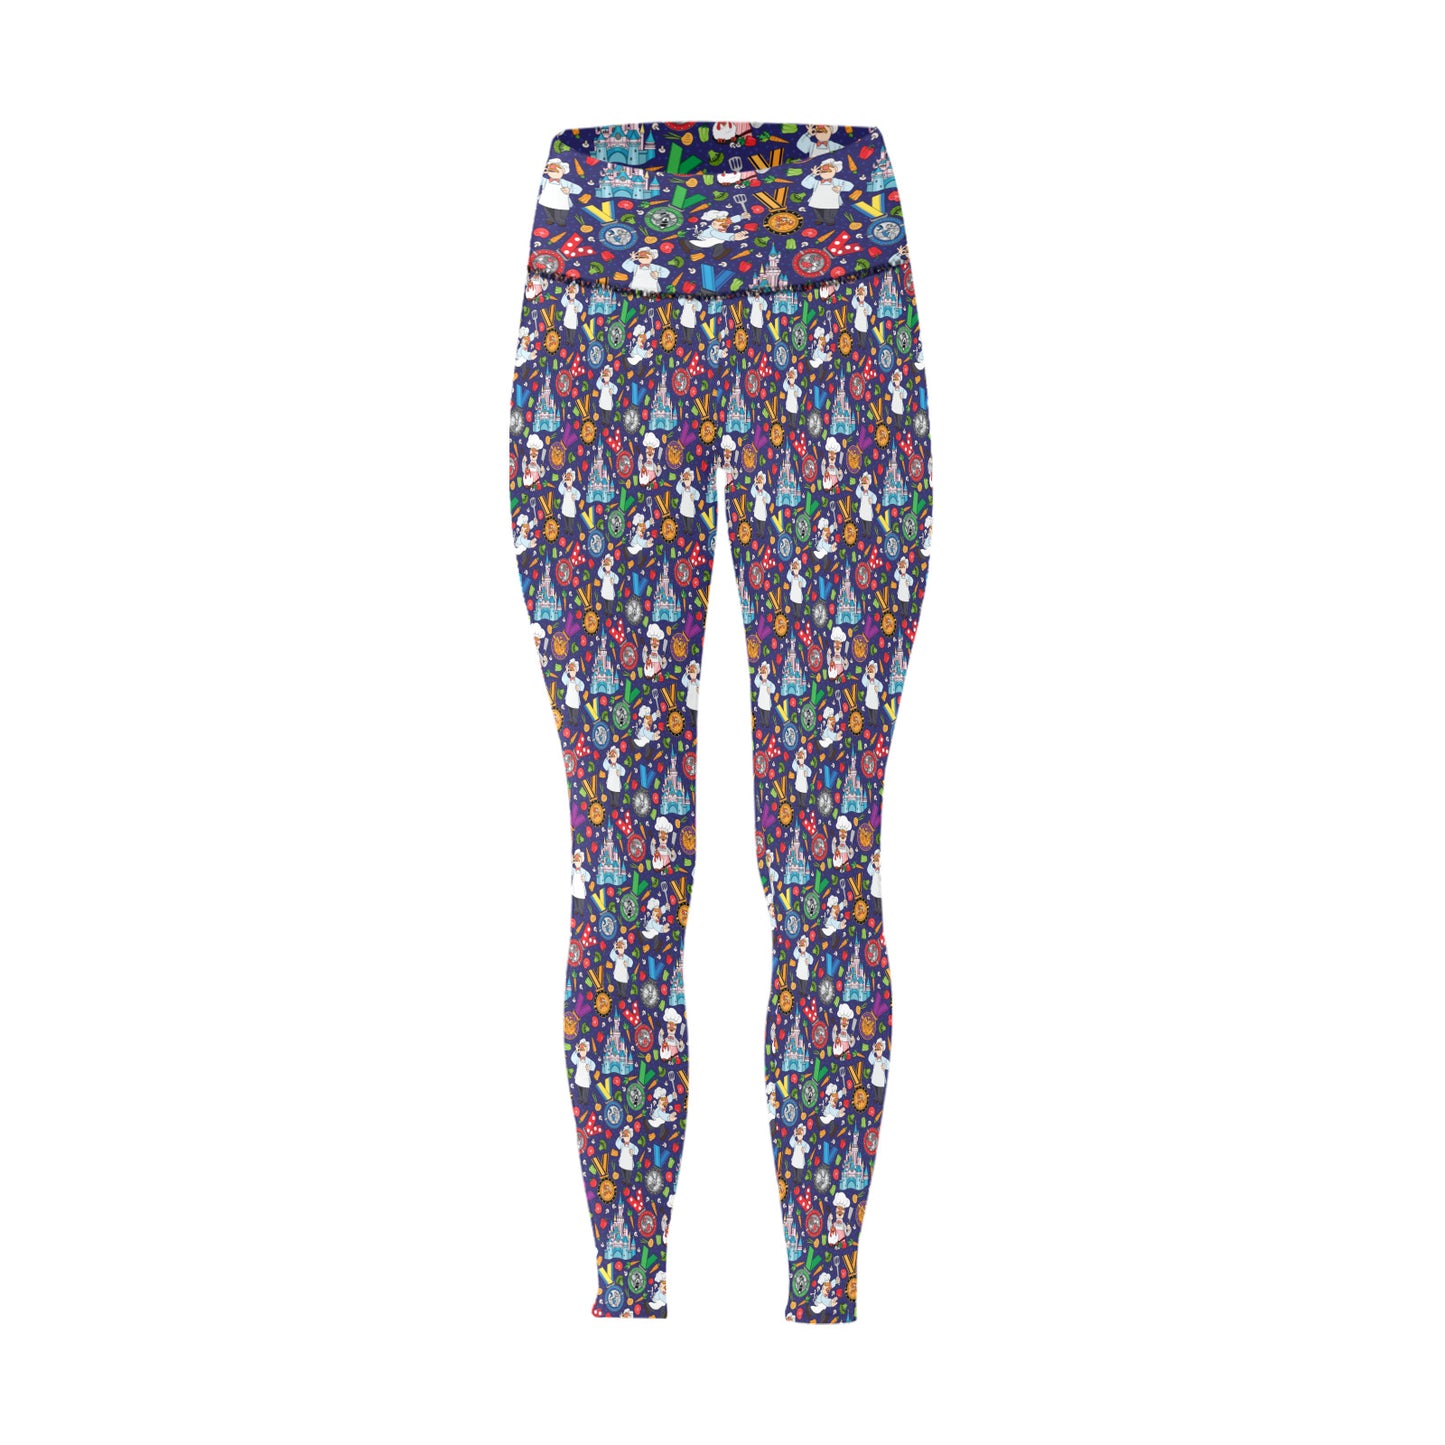 Muppets Chef Wine And Dine Race Women's Athletic Leggings